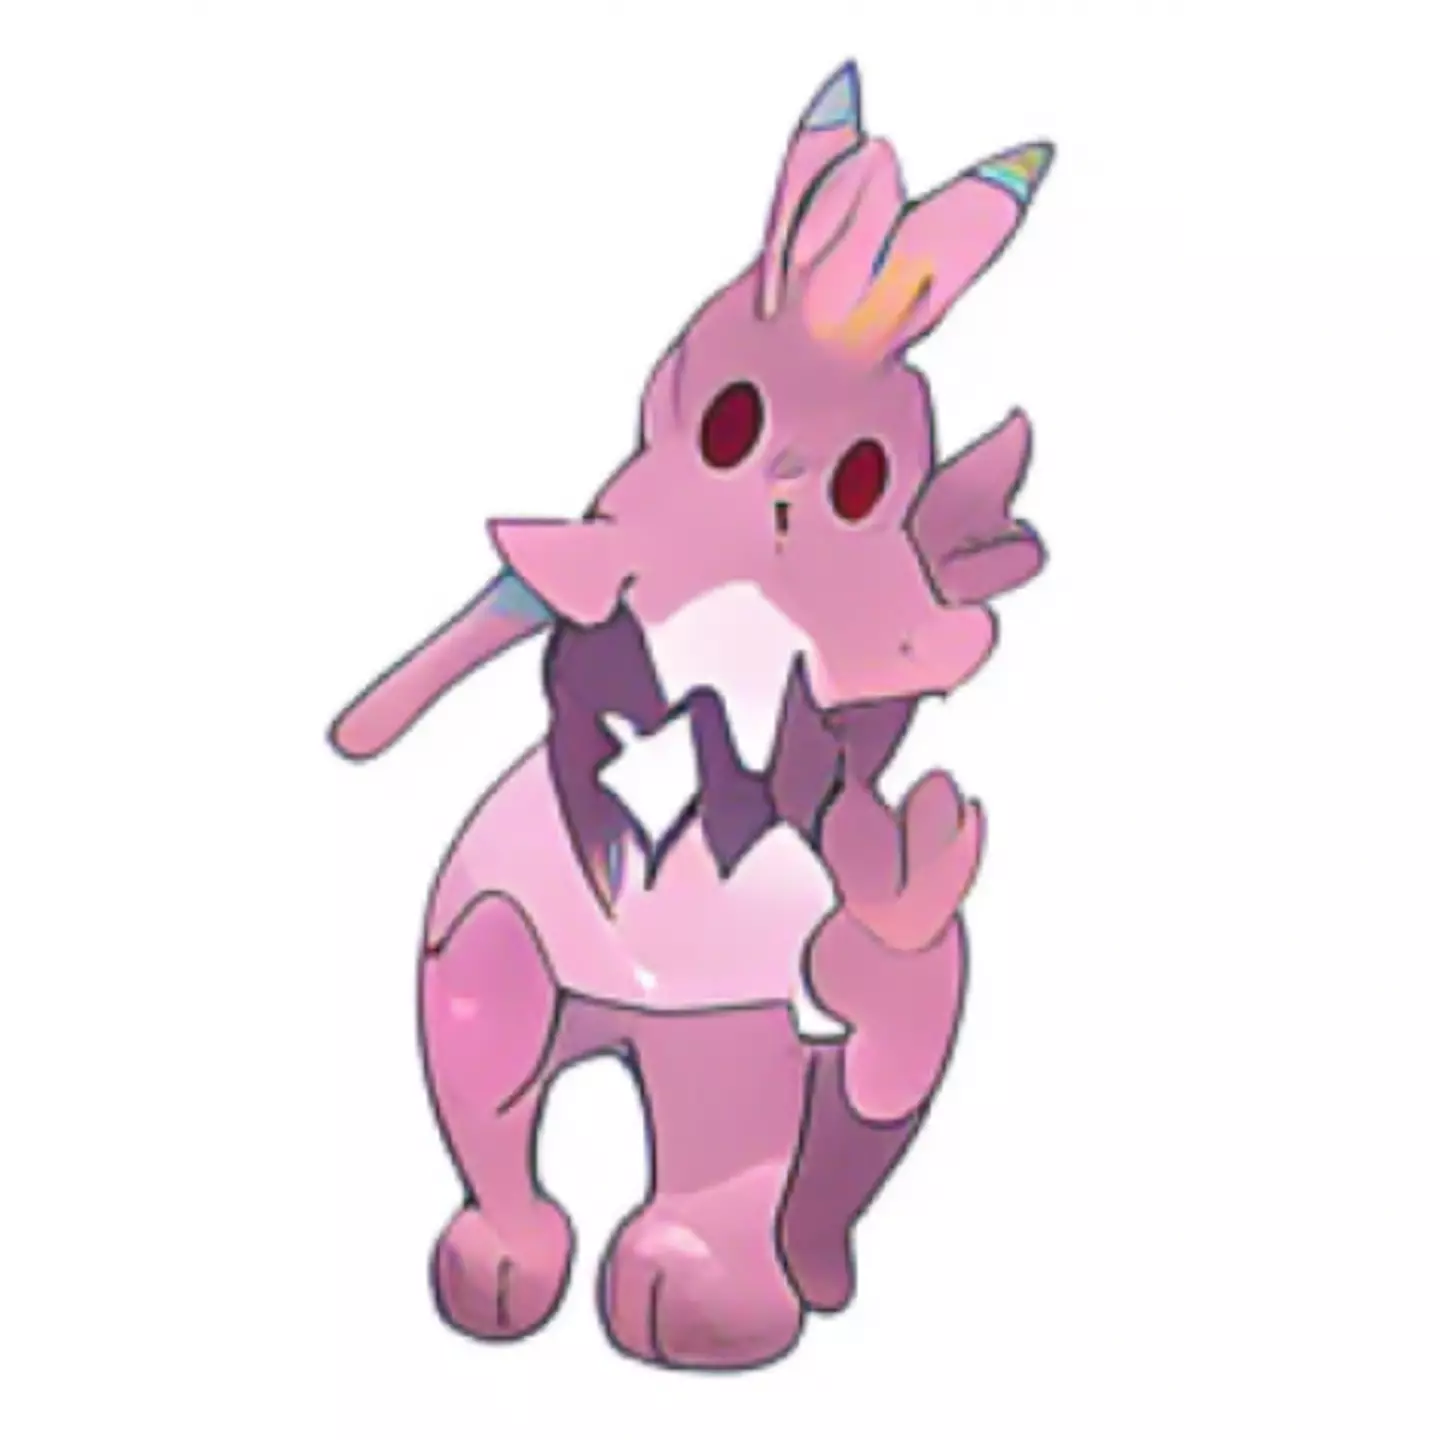 This miscellaneous pink monstrosity is one of the AI generated Pokémon taking Reddit by storm /